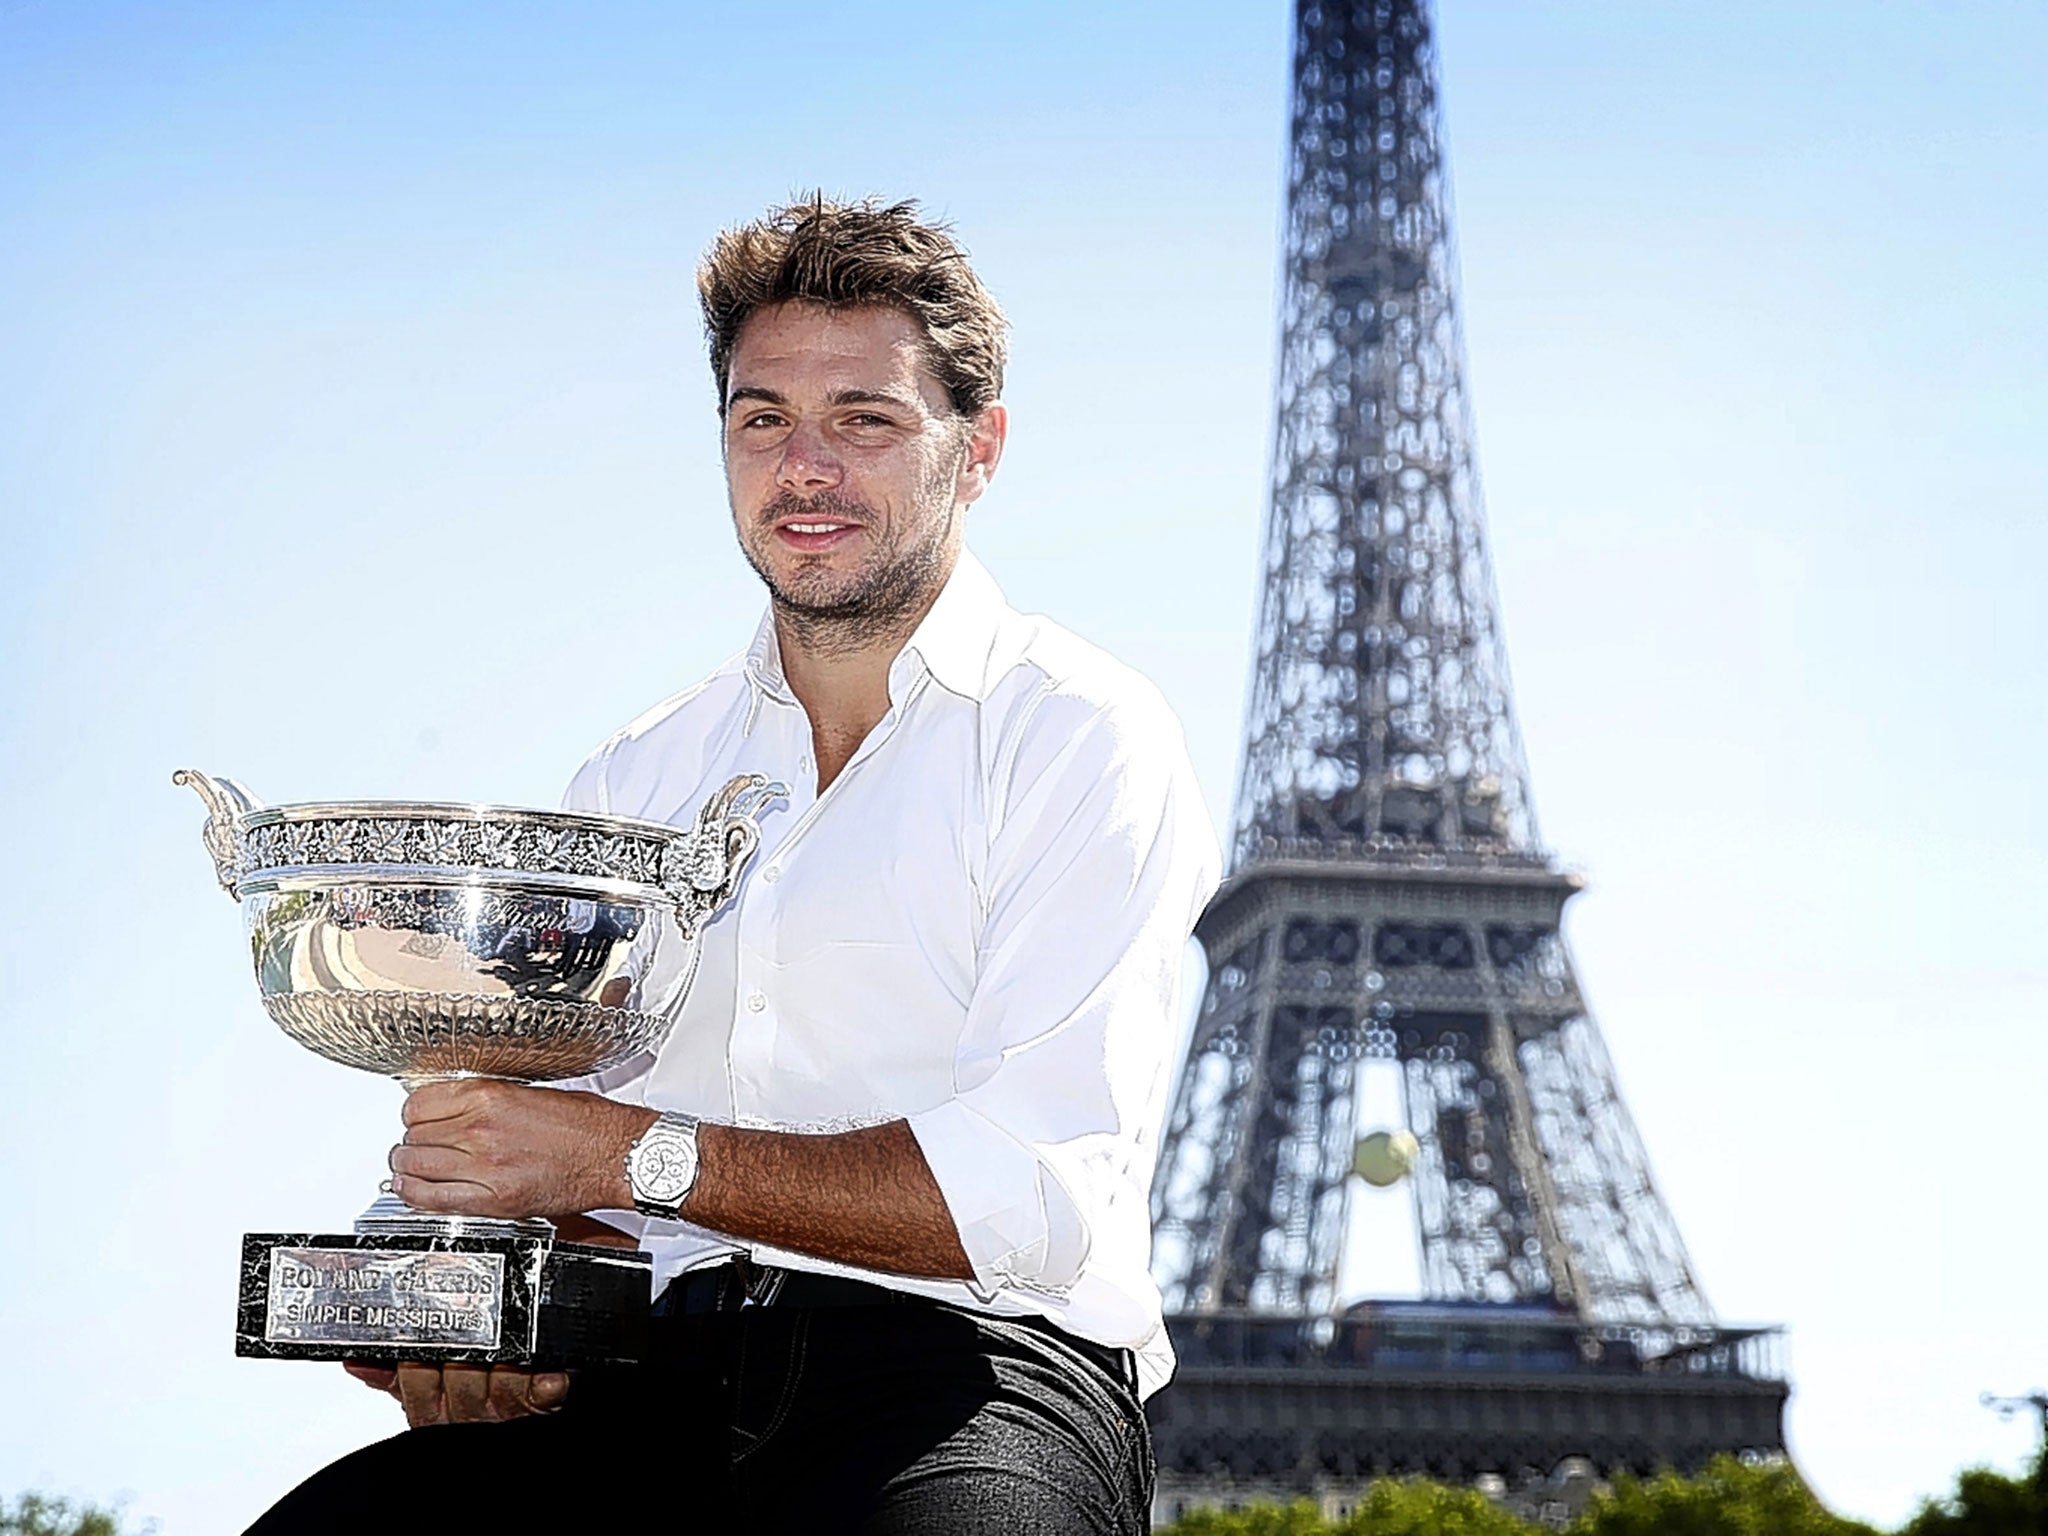 Stan Wawrinka holds La Coupe des Mousquetaires trophy in front of the Eiffel Tower after his dramatic four set win over Novak Djokovic in the French Open men’s singles final